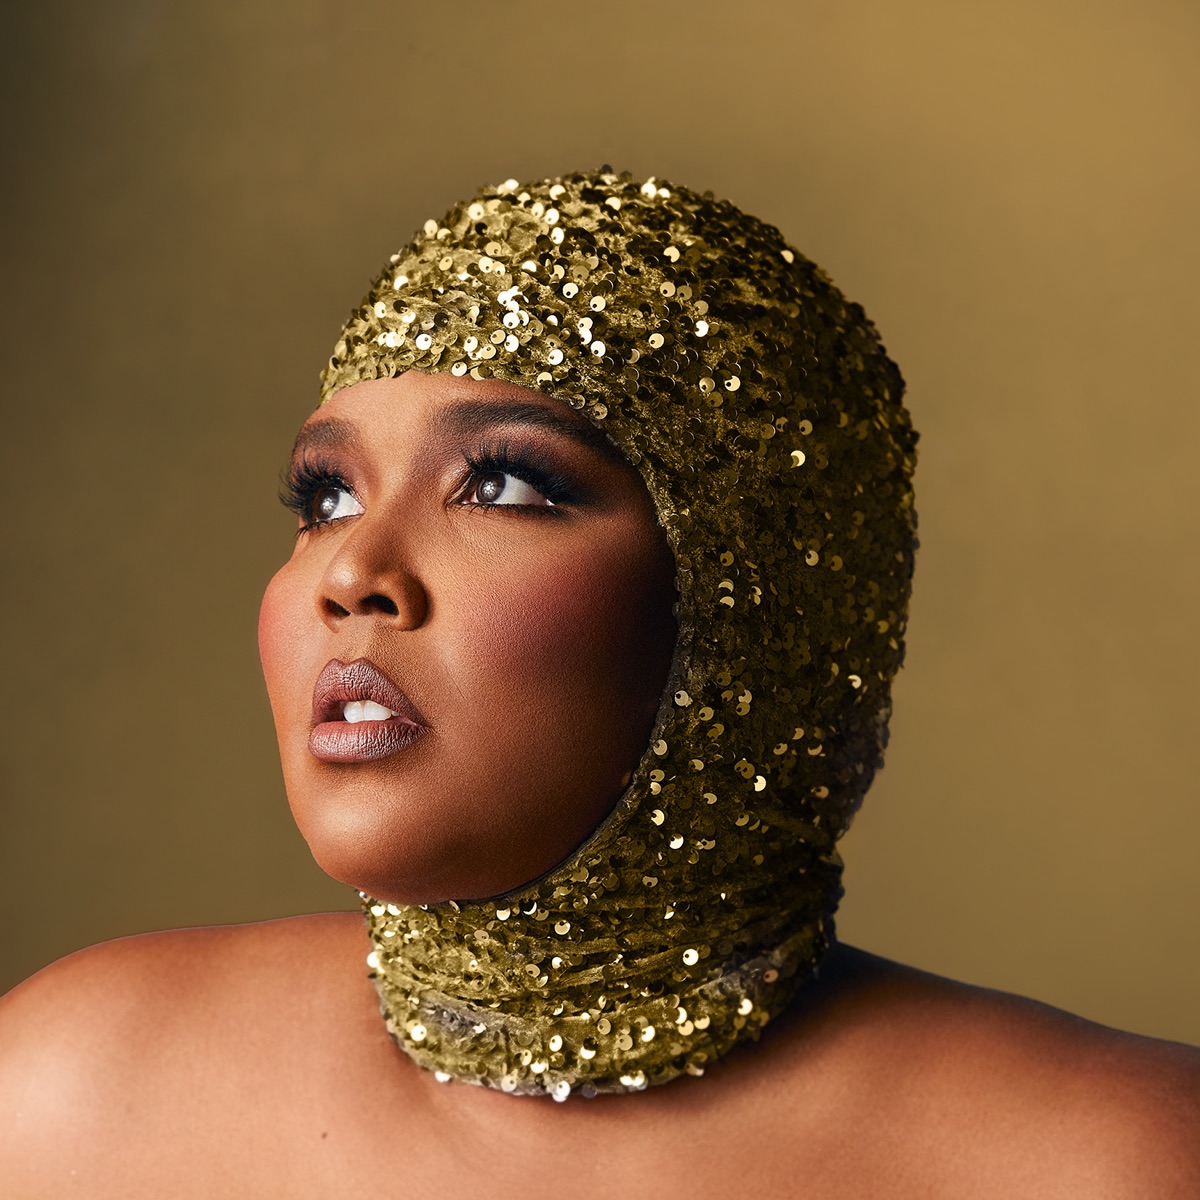 Special - Album by Lizzo